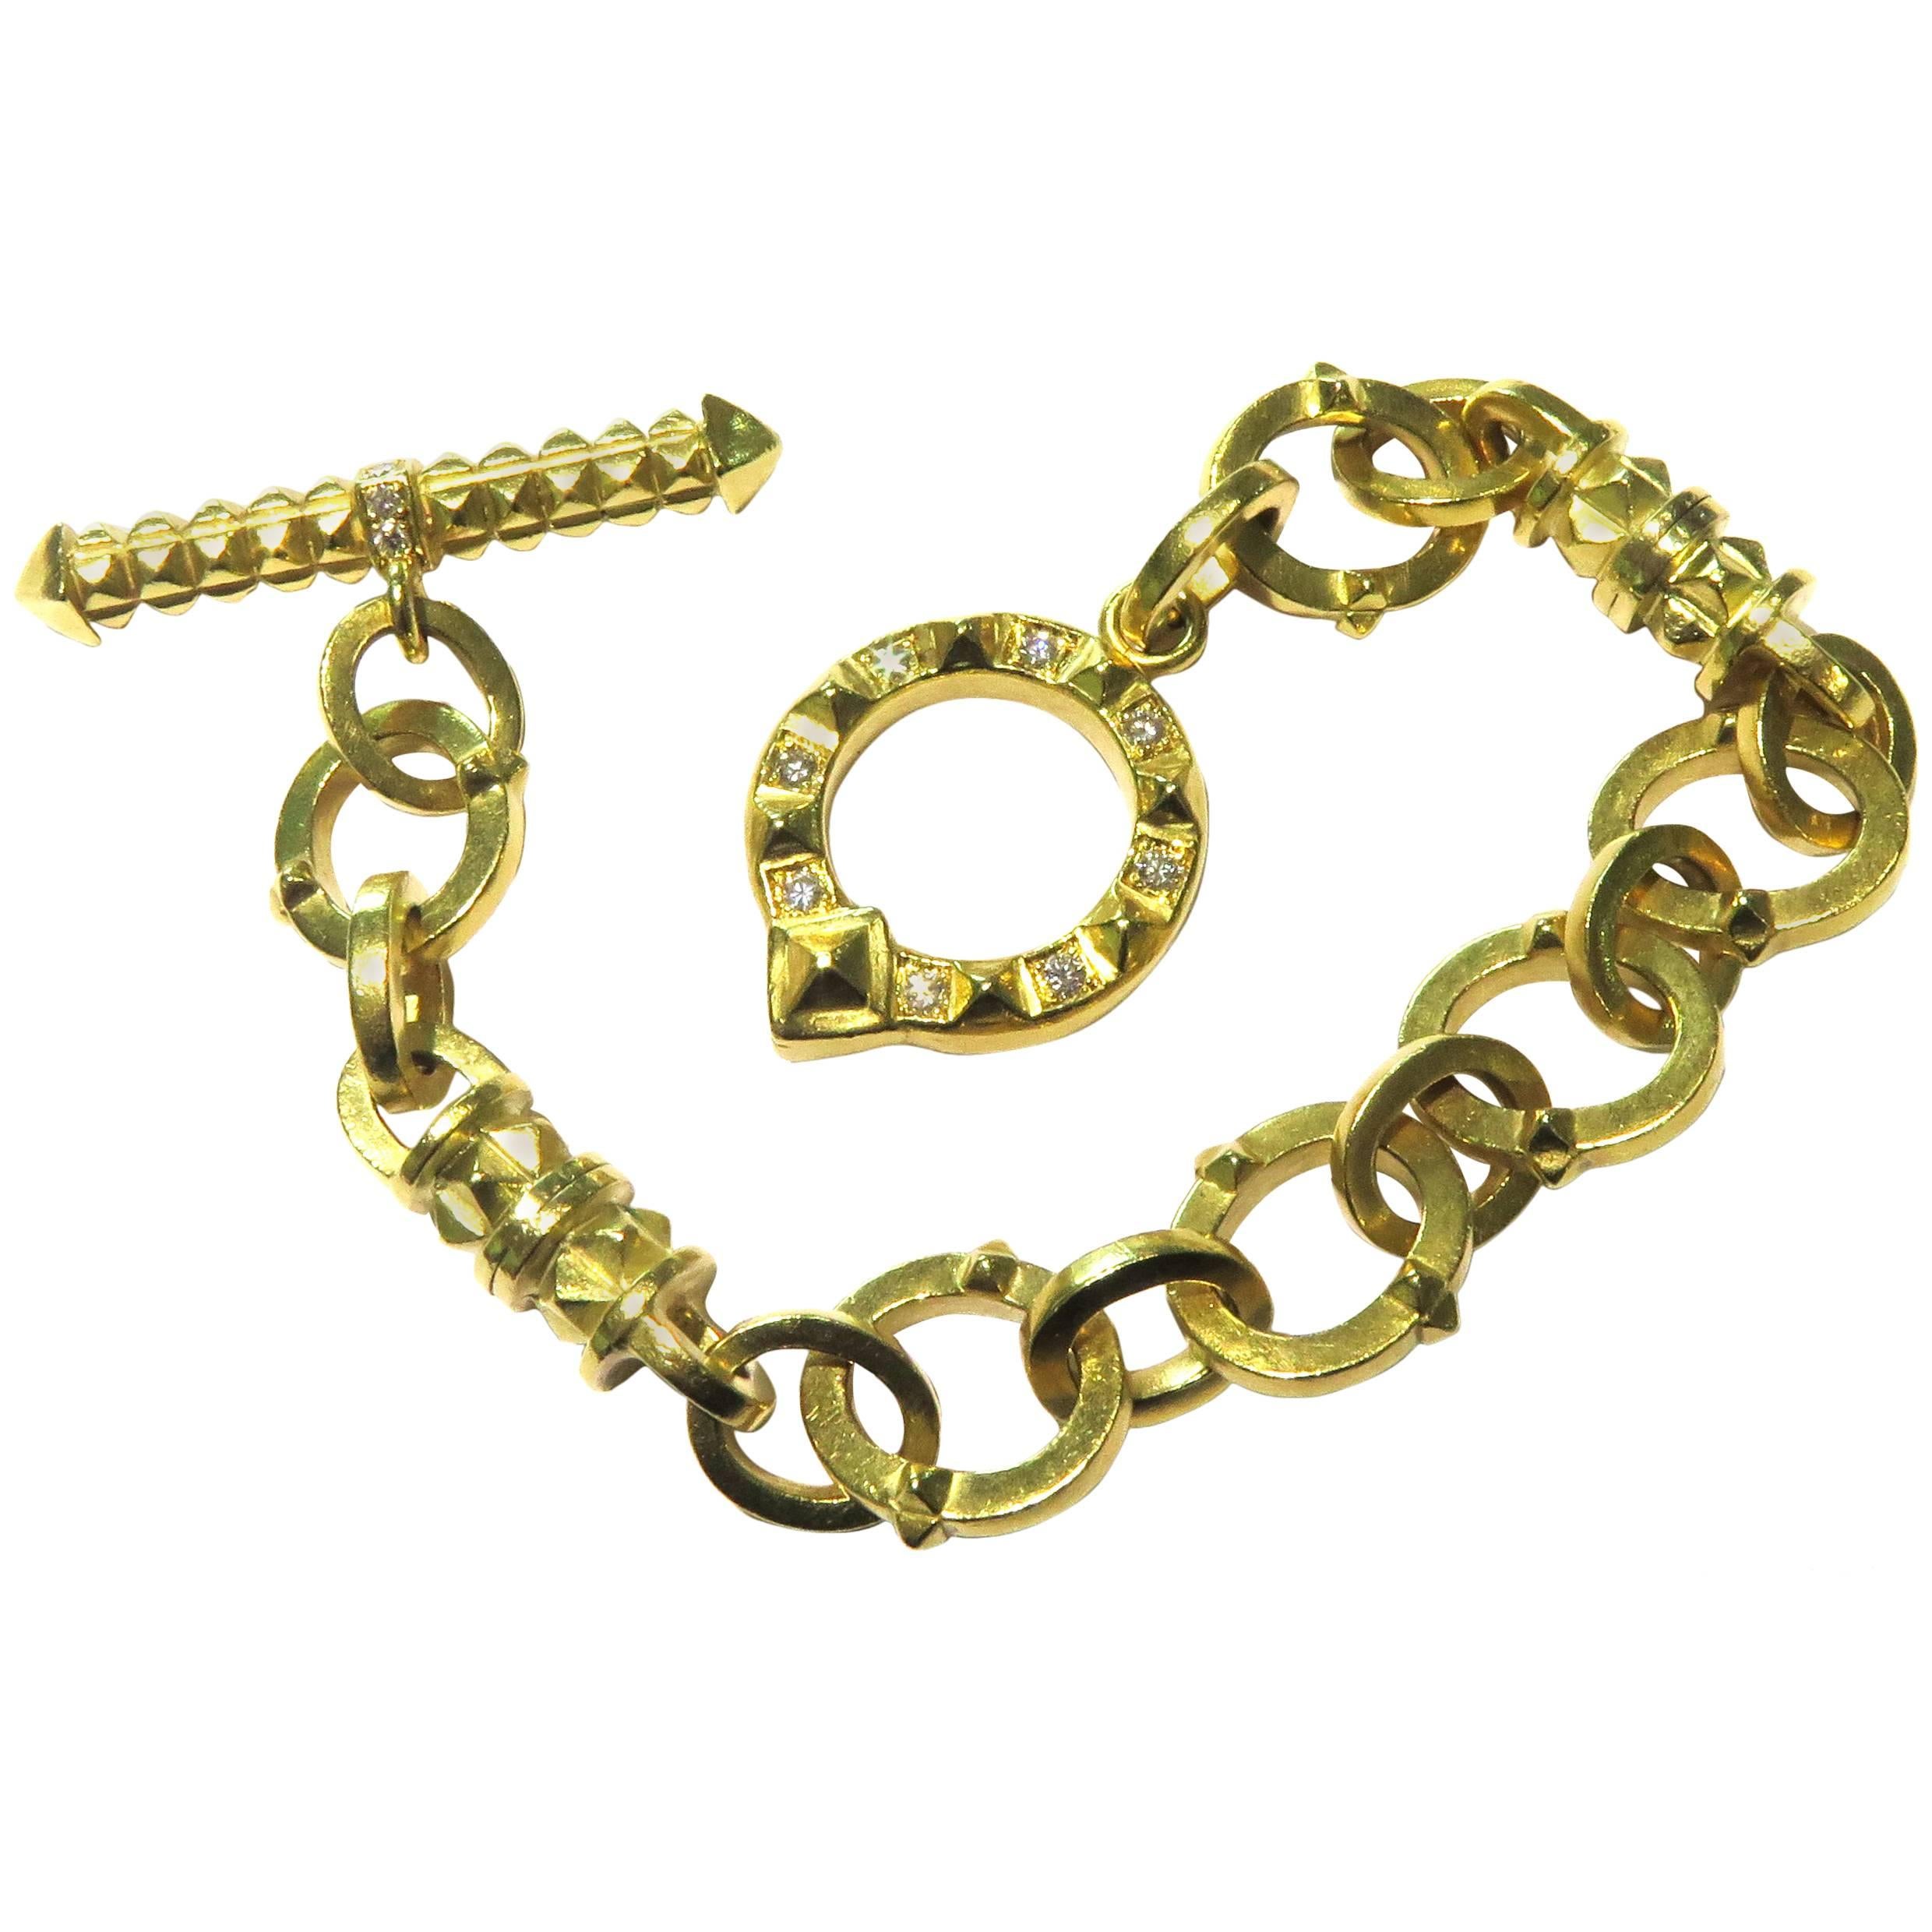 Exceptional Heavy Diamond Gold Solid Links Toggle Bracelet